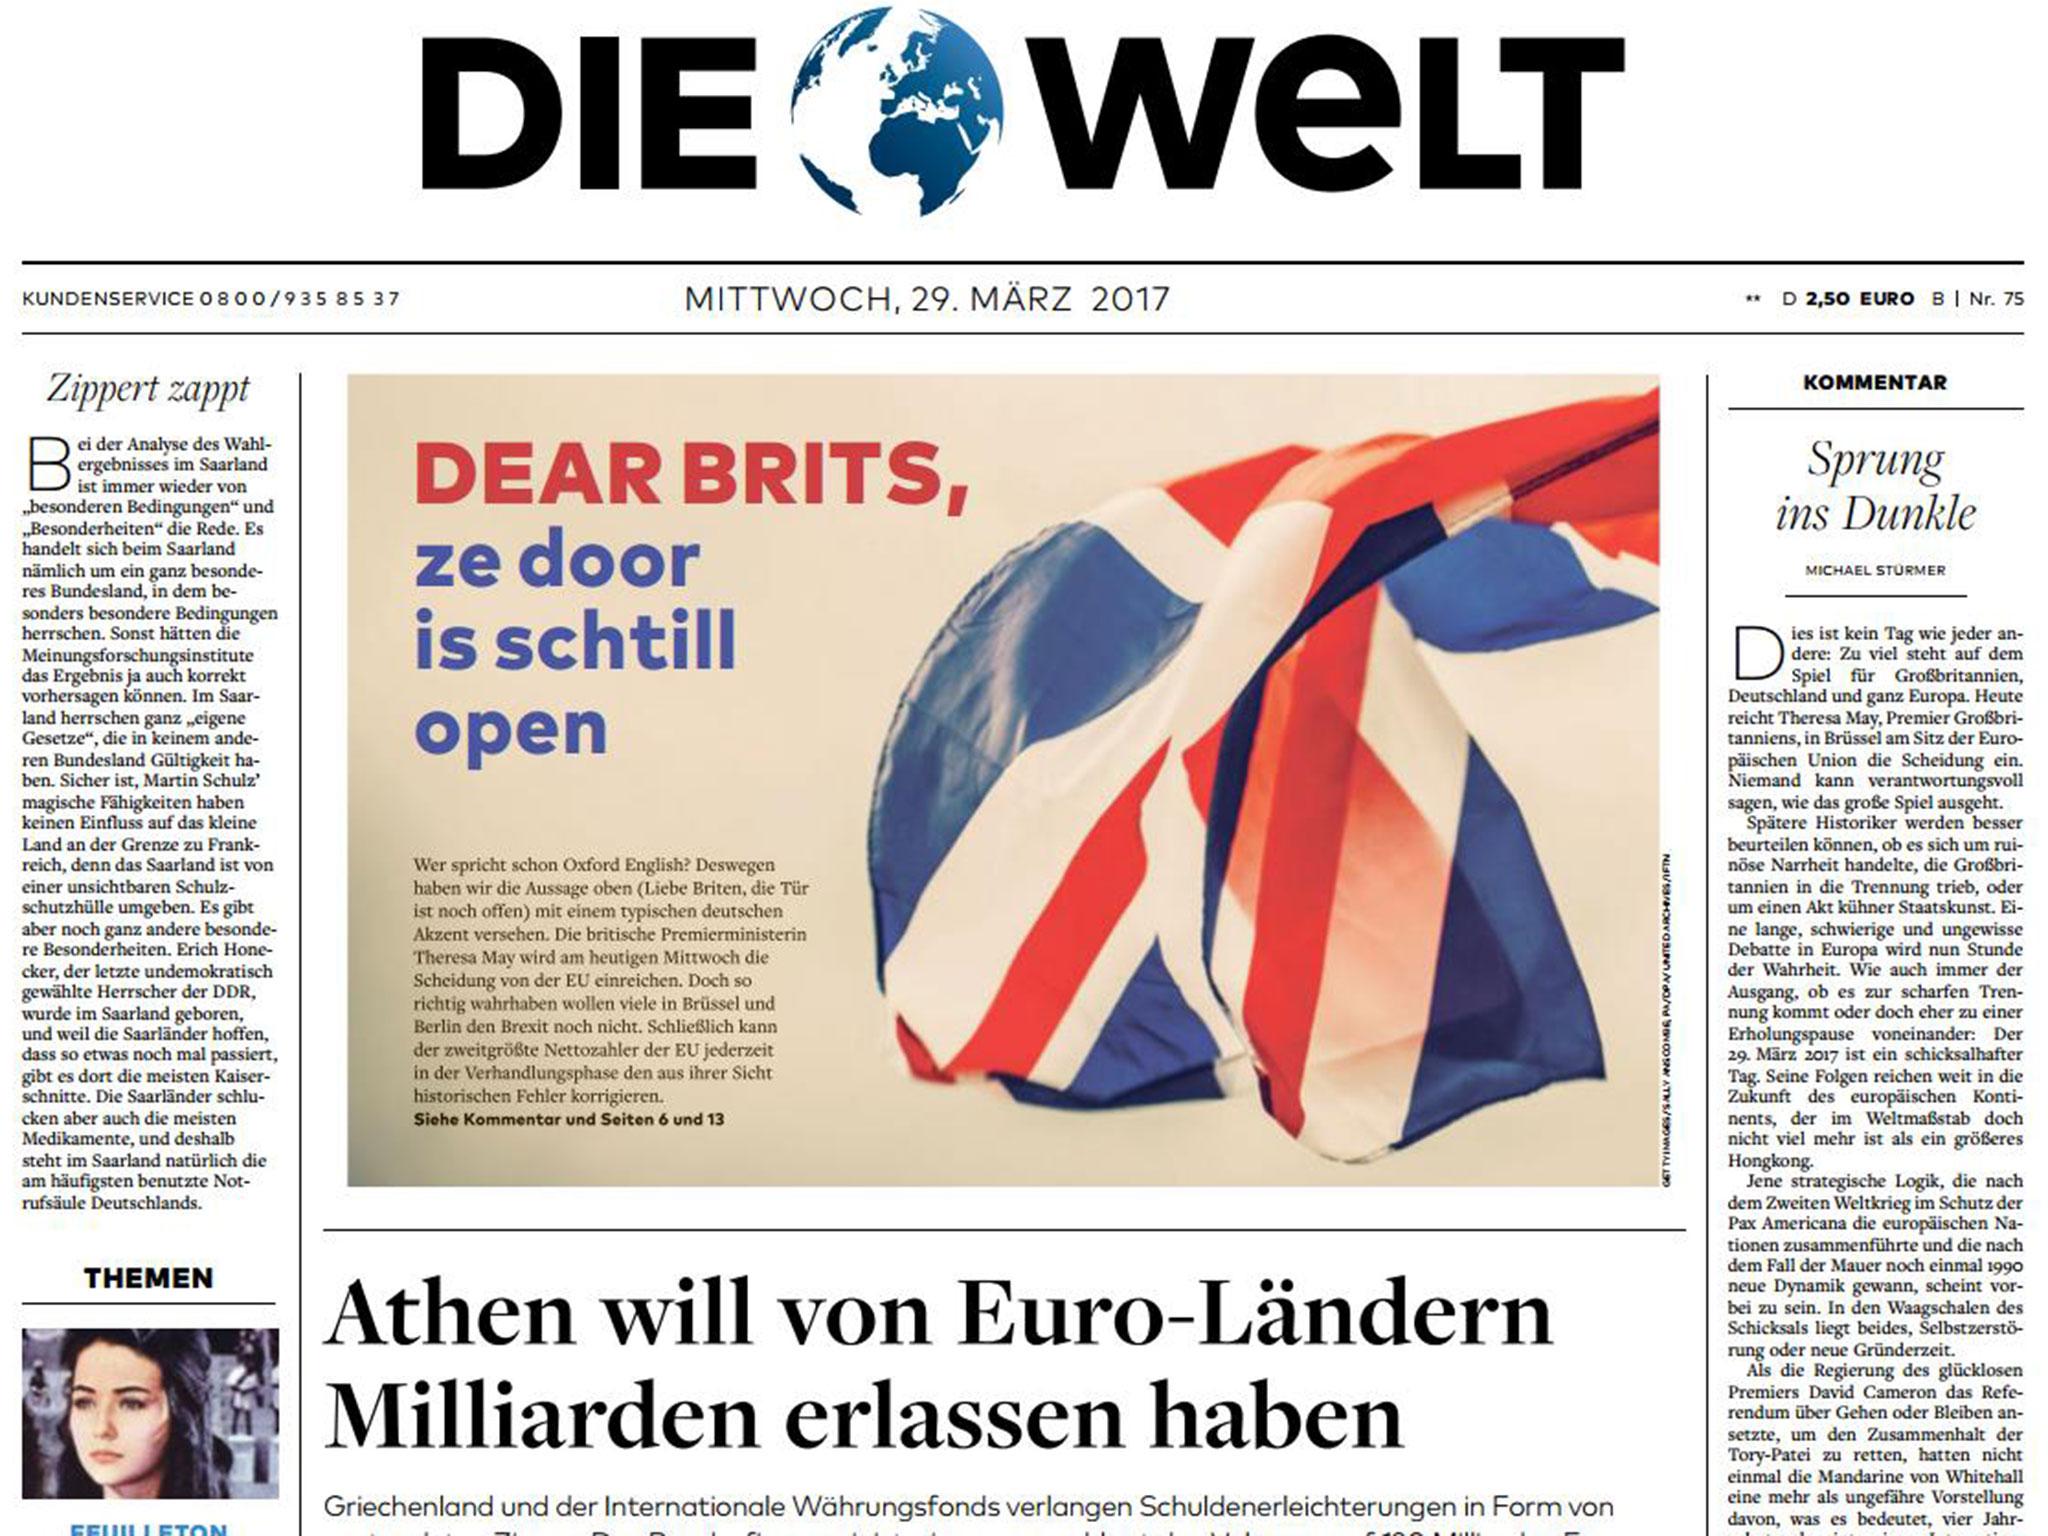 Die Welt's front page on 29 March